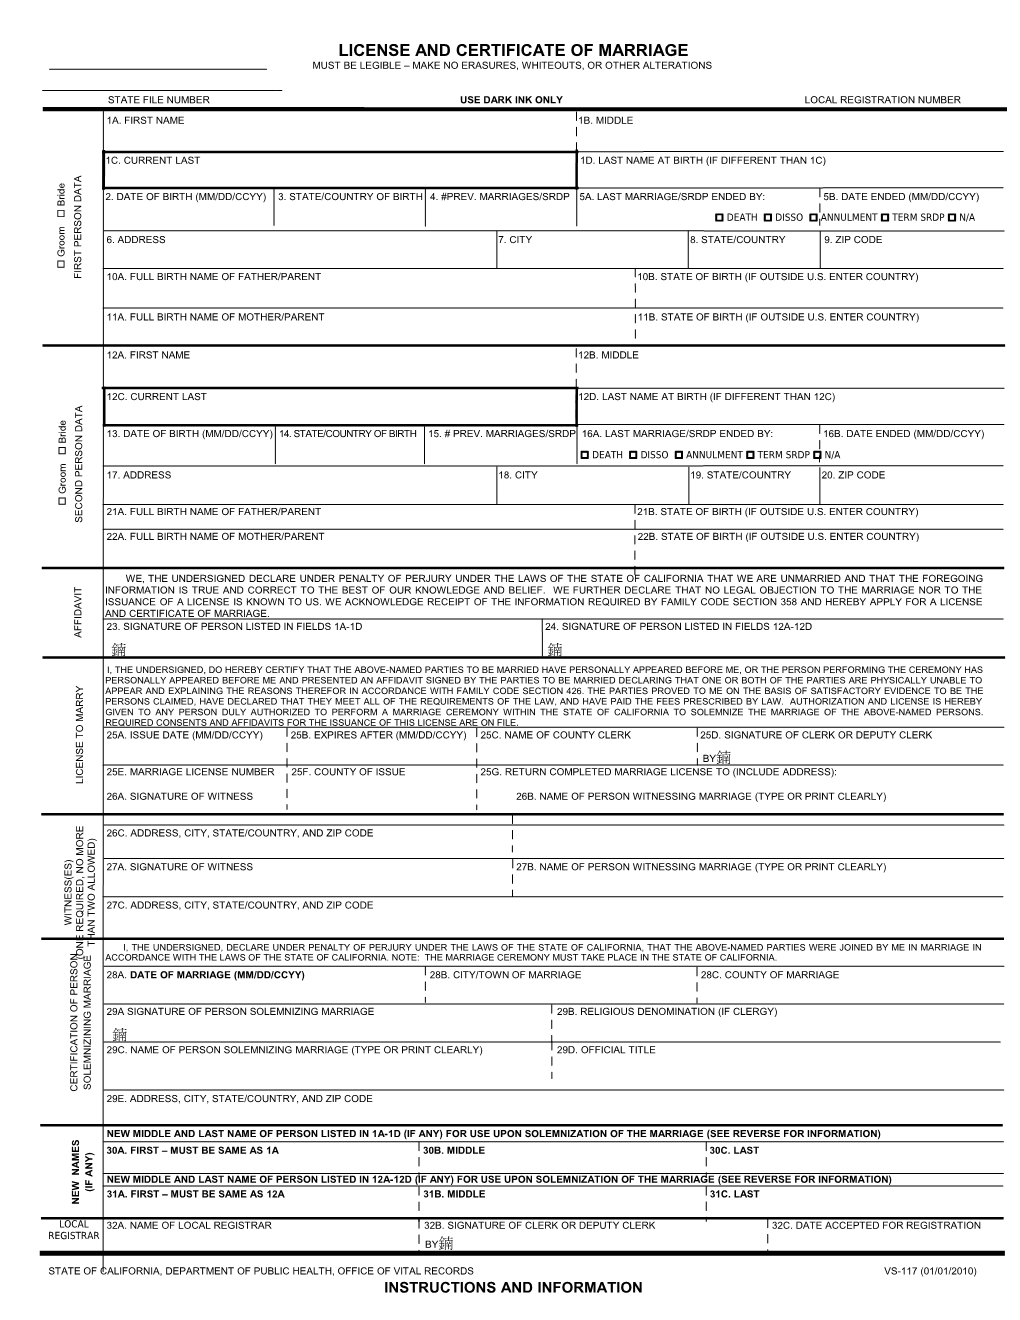 License and Certificate of Marriage